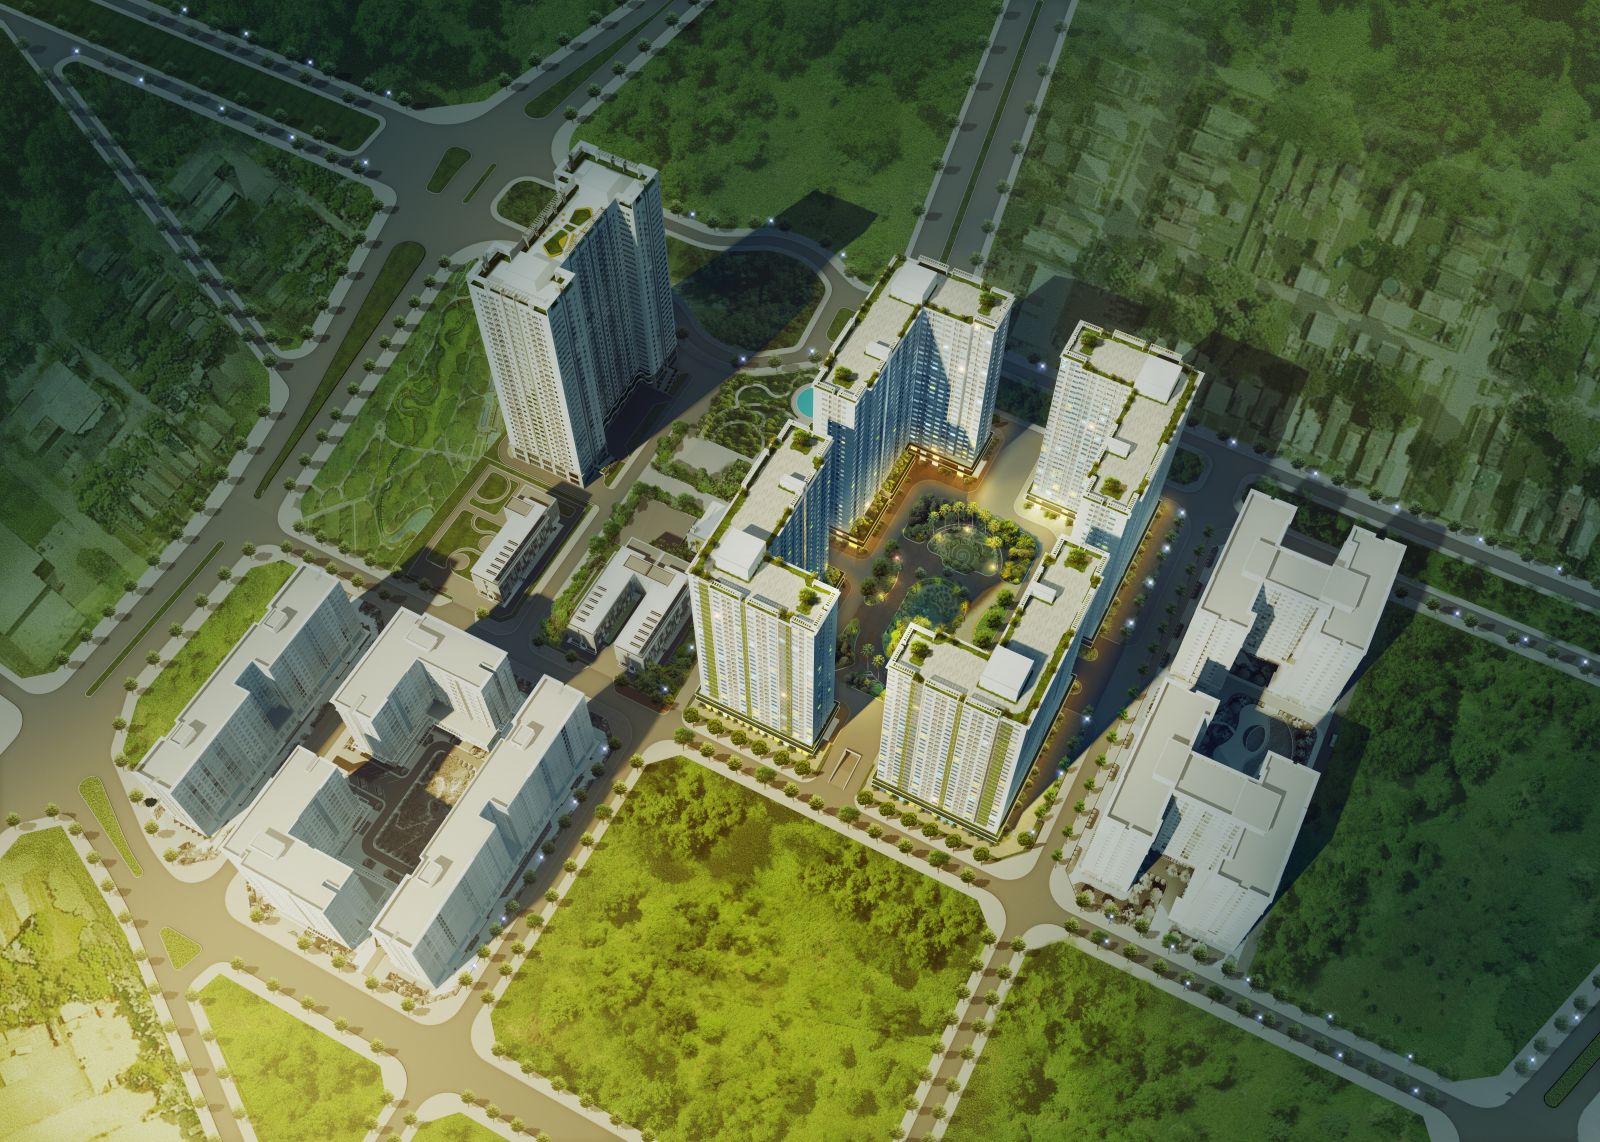 Artist's impression of a social housing project in Hanoi.